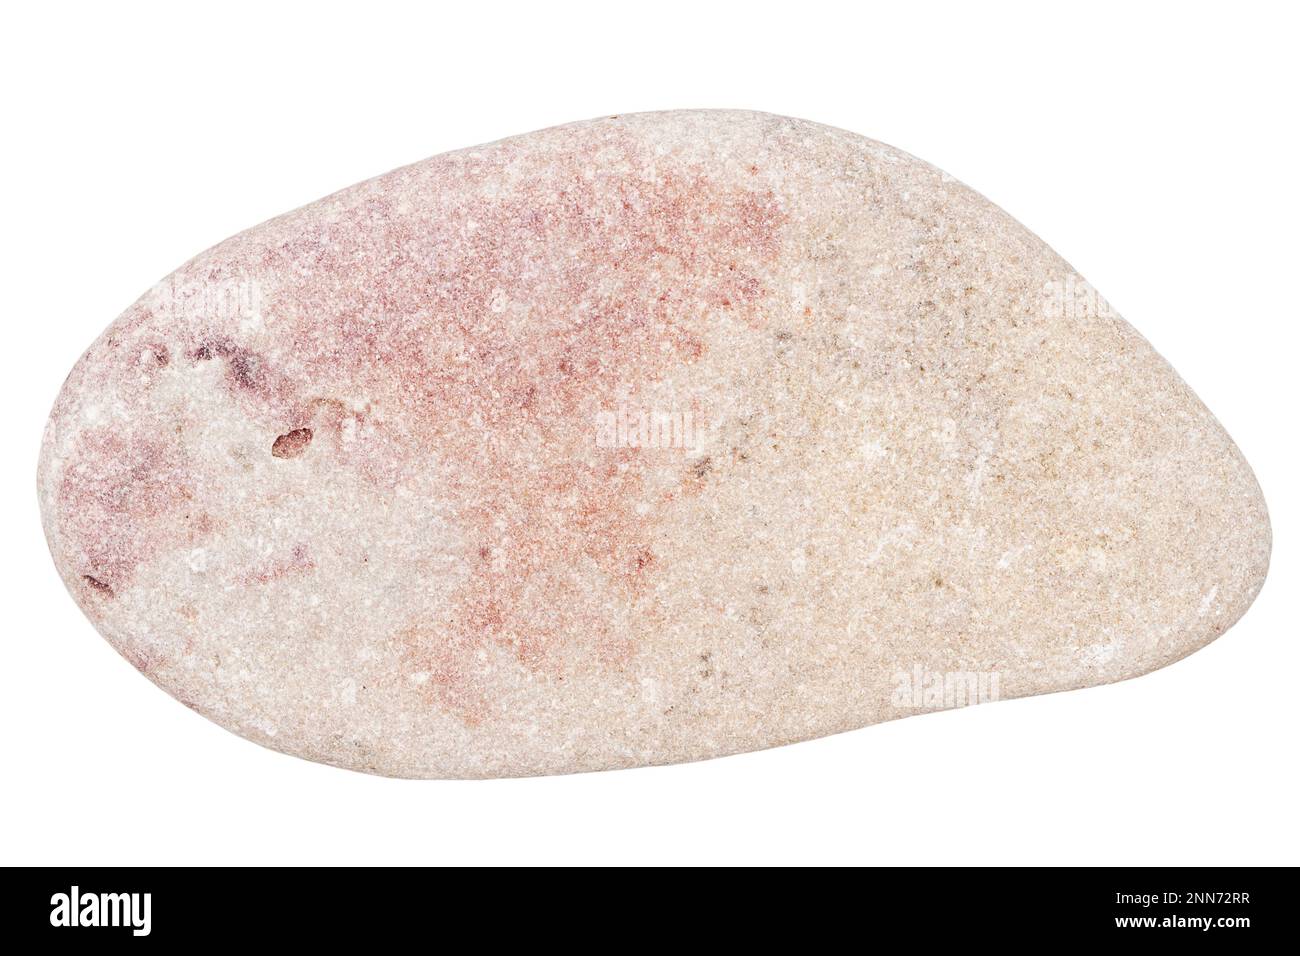 Top view of single pink pebble isolated on white background. Stock Photo